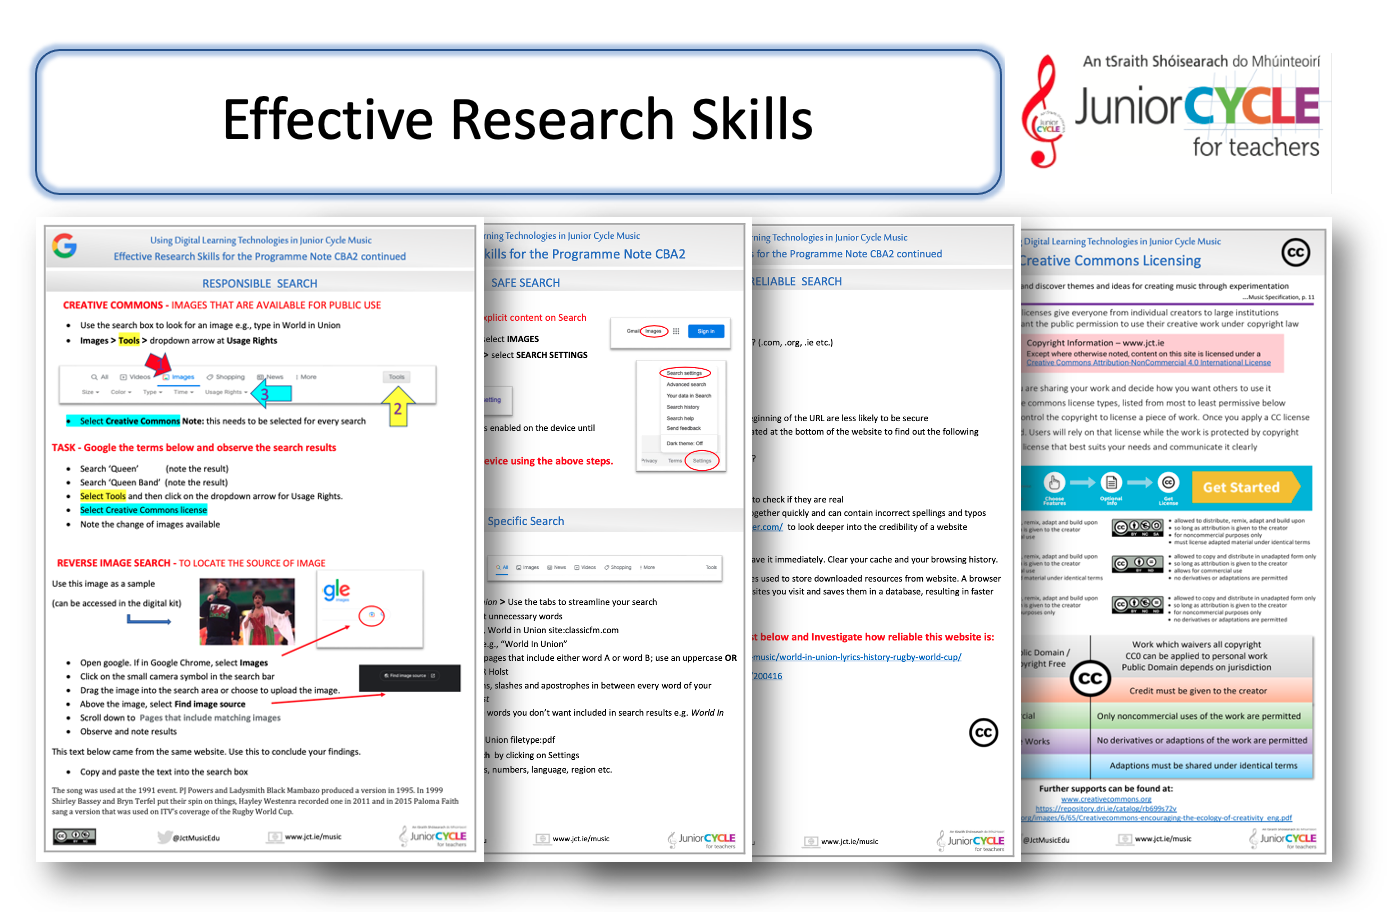 Link to Effective Research Skills